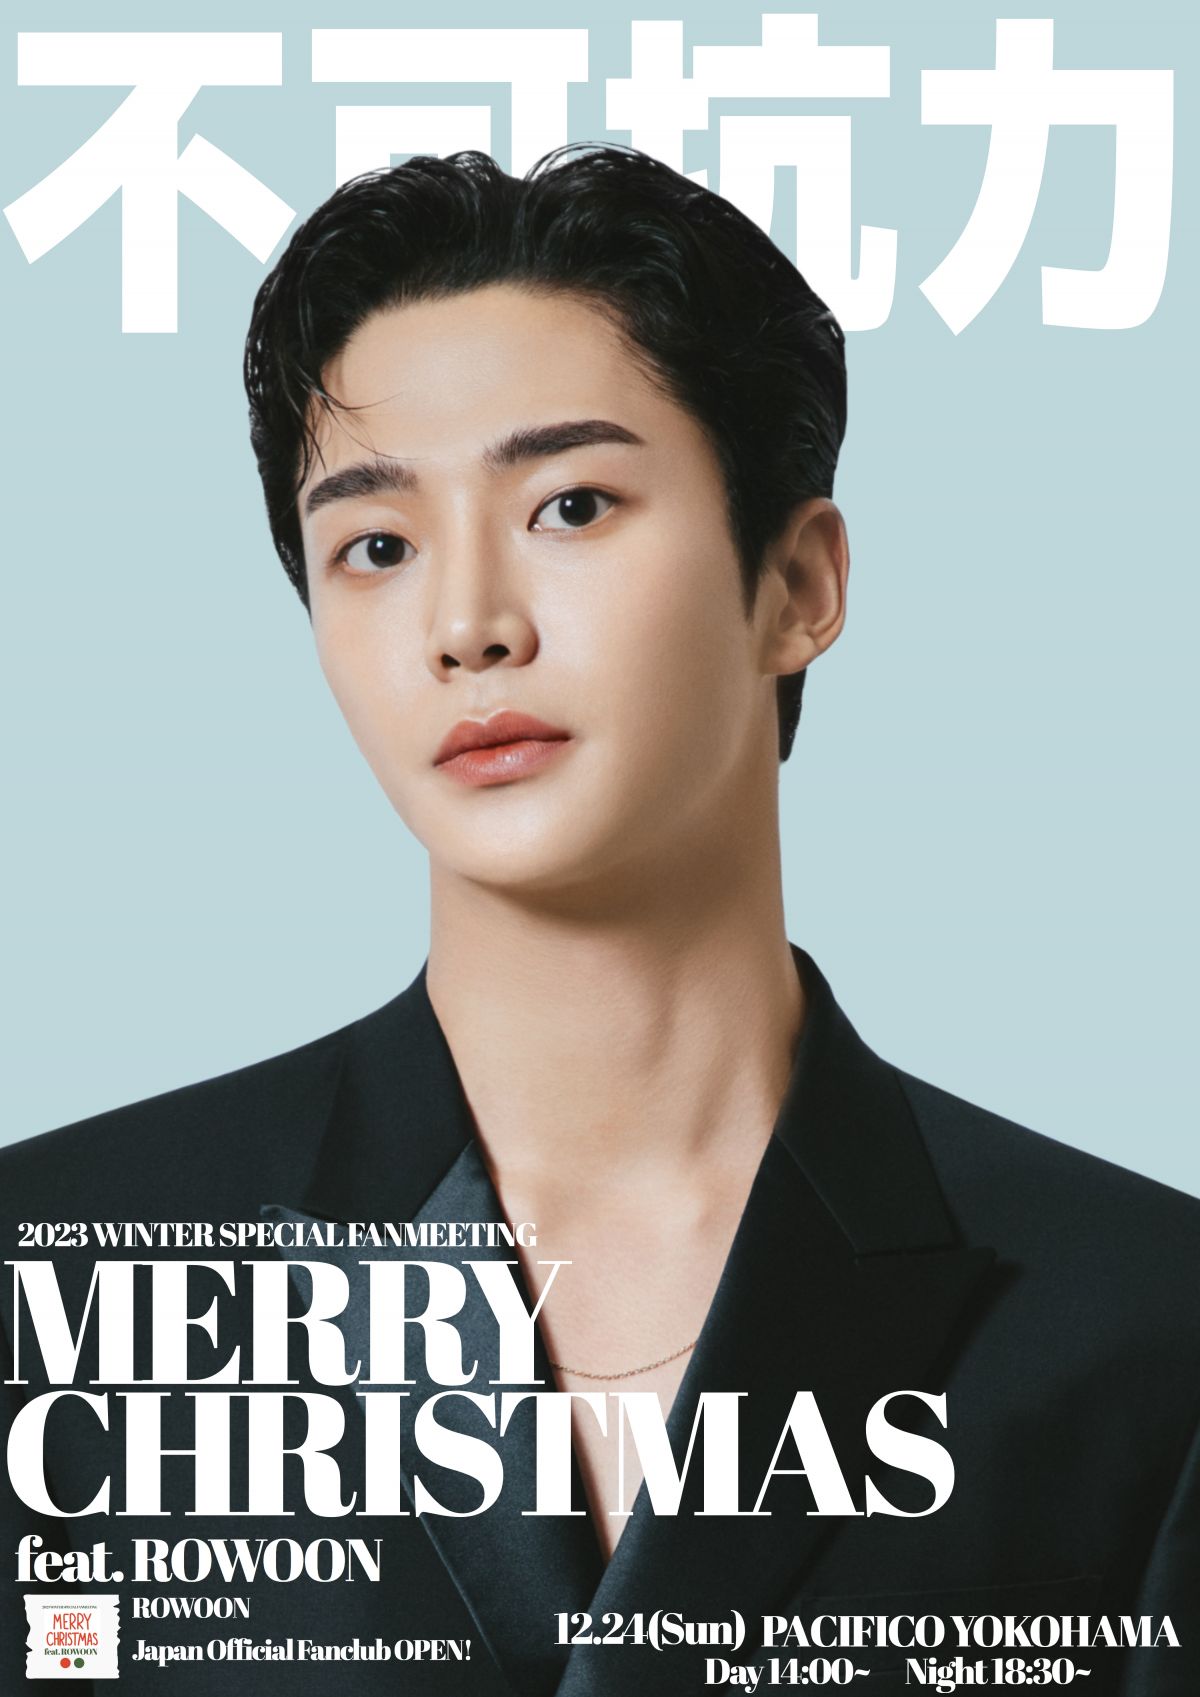 2023 WINTER SPECIAL FANMEETING - MERRY CHRISTMAS feat.ROWOON - [夜]